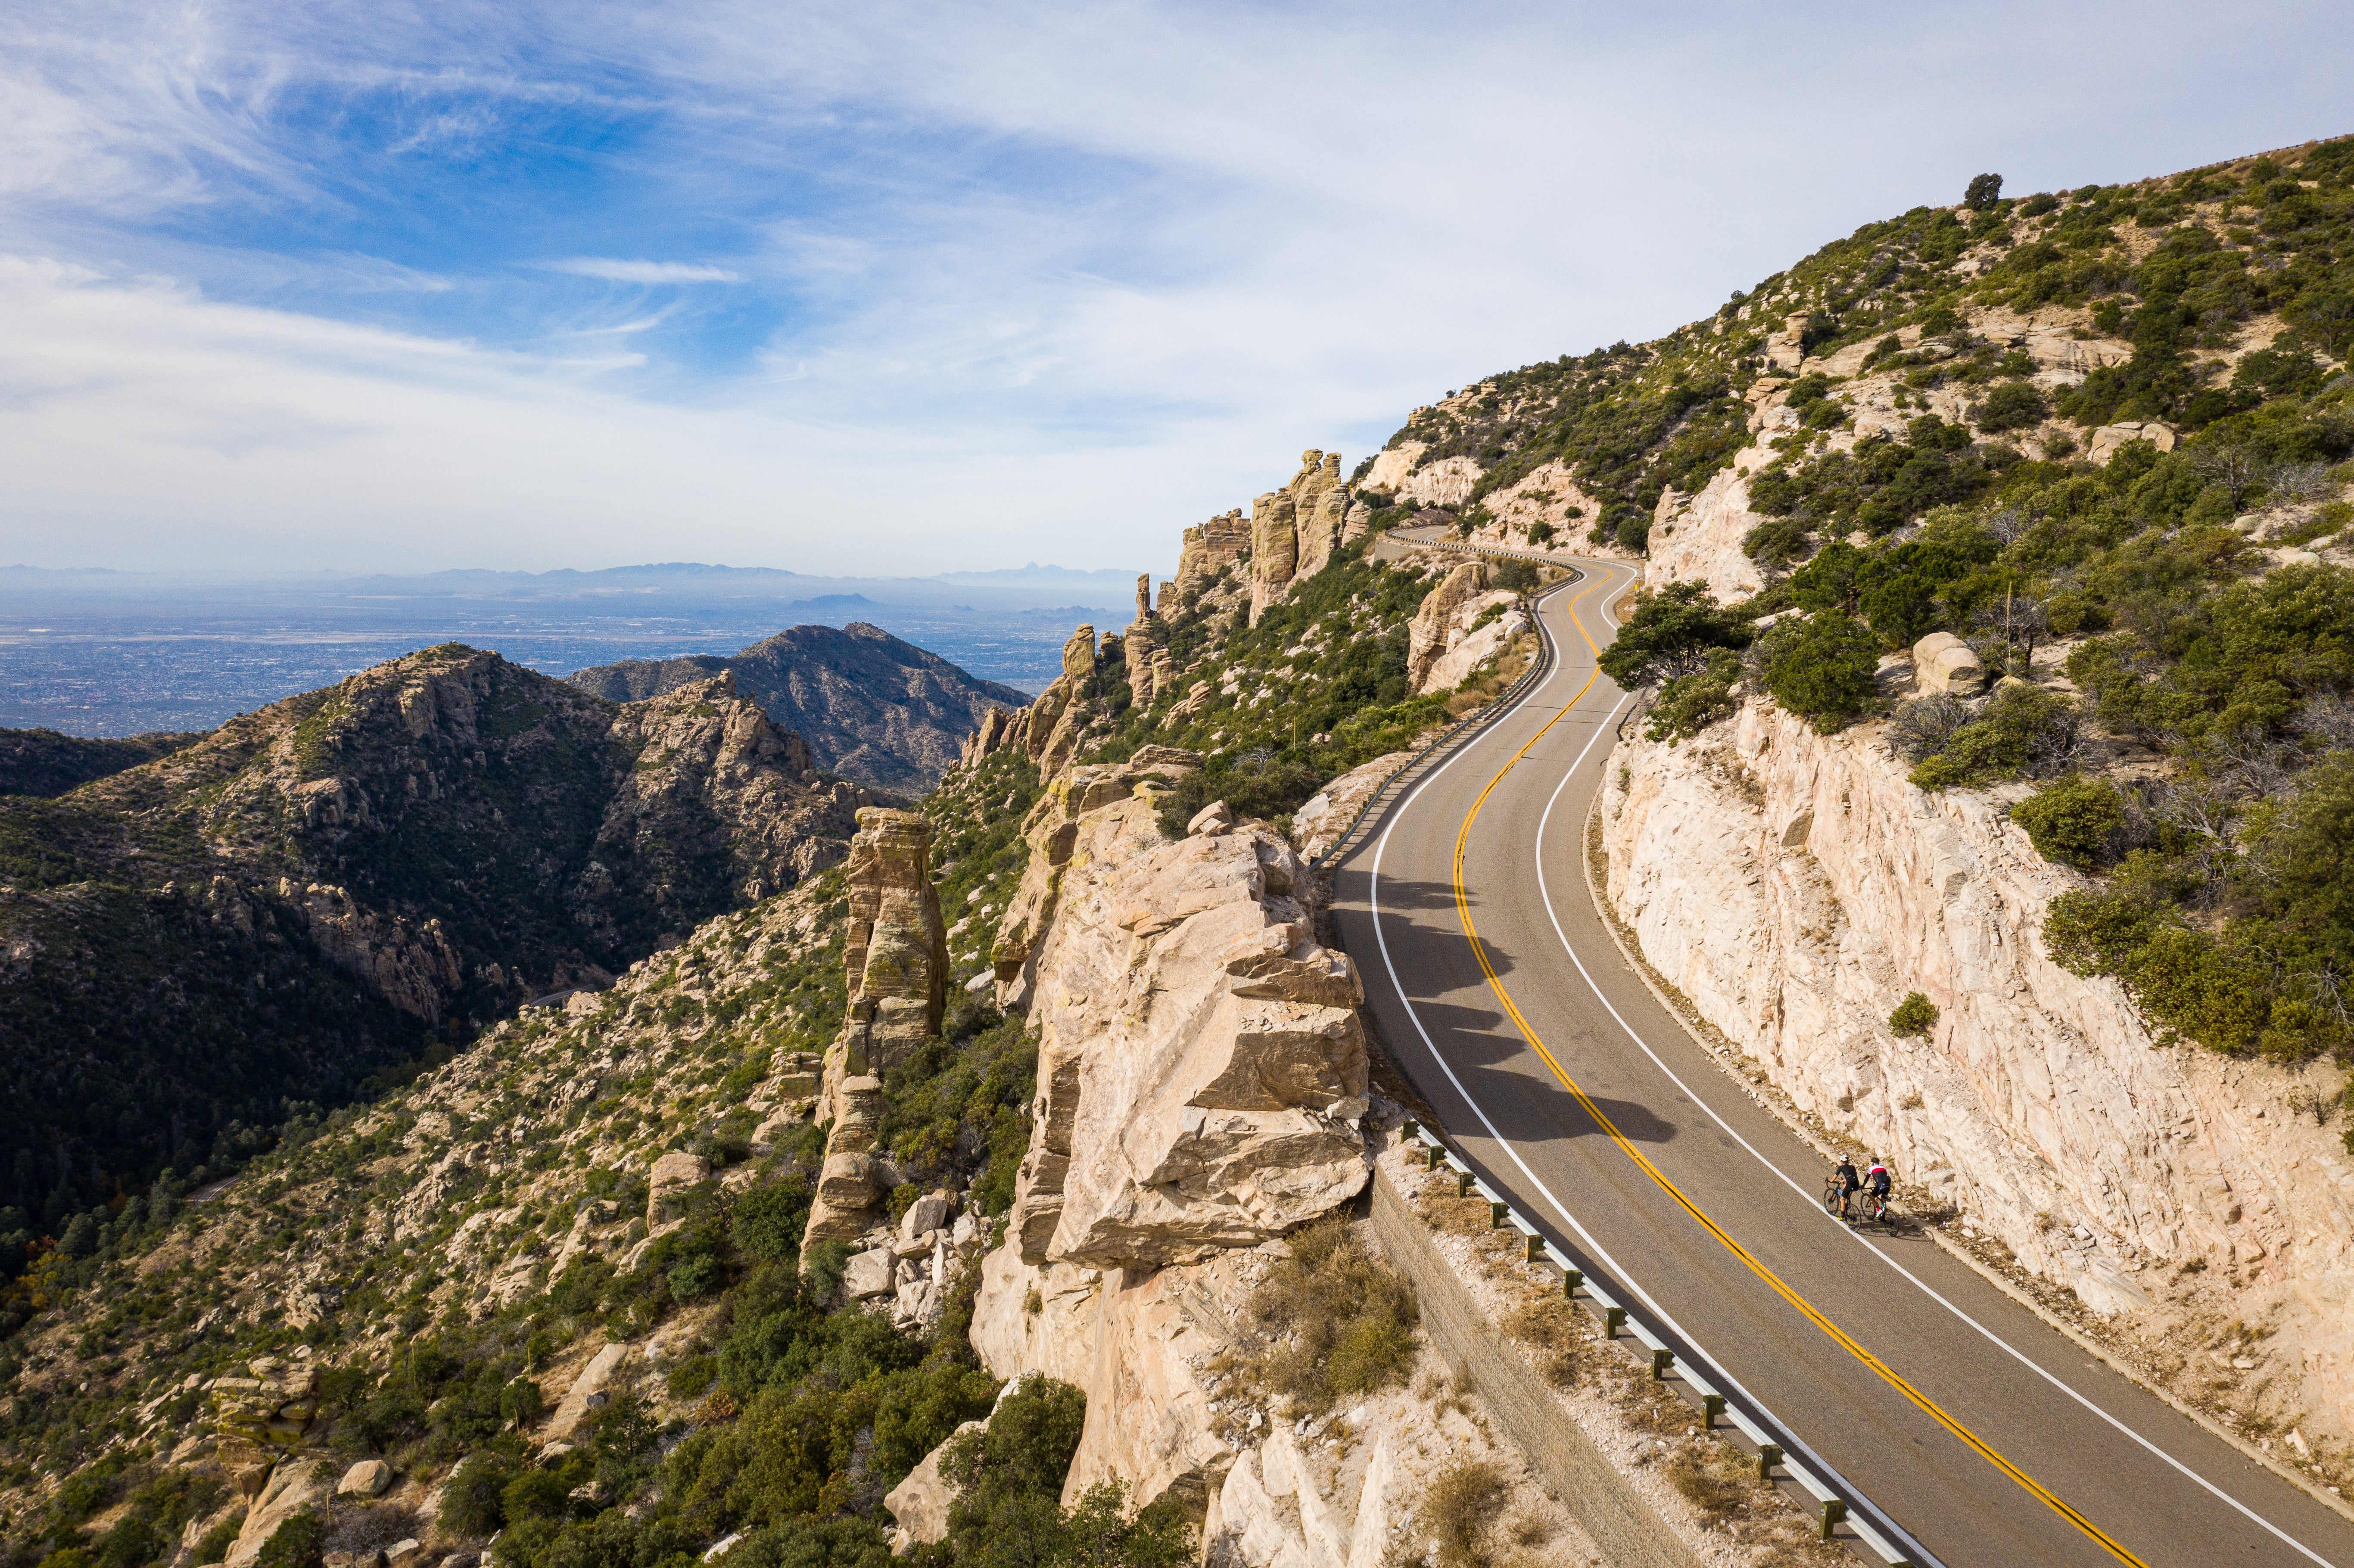 From cacti to canyons, craters to forests – enjoy diverse vistas on a road trip through Arizona